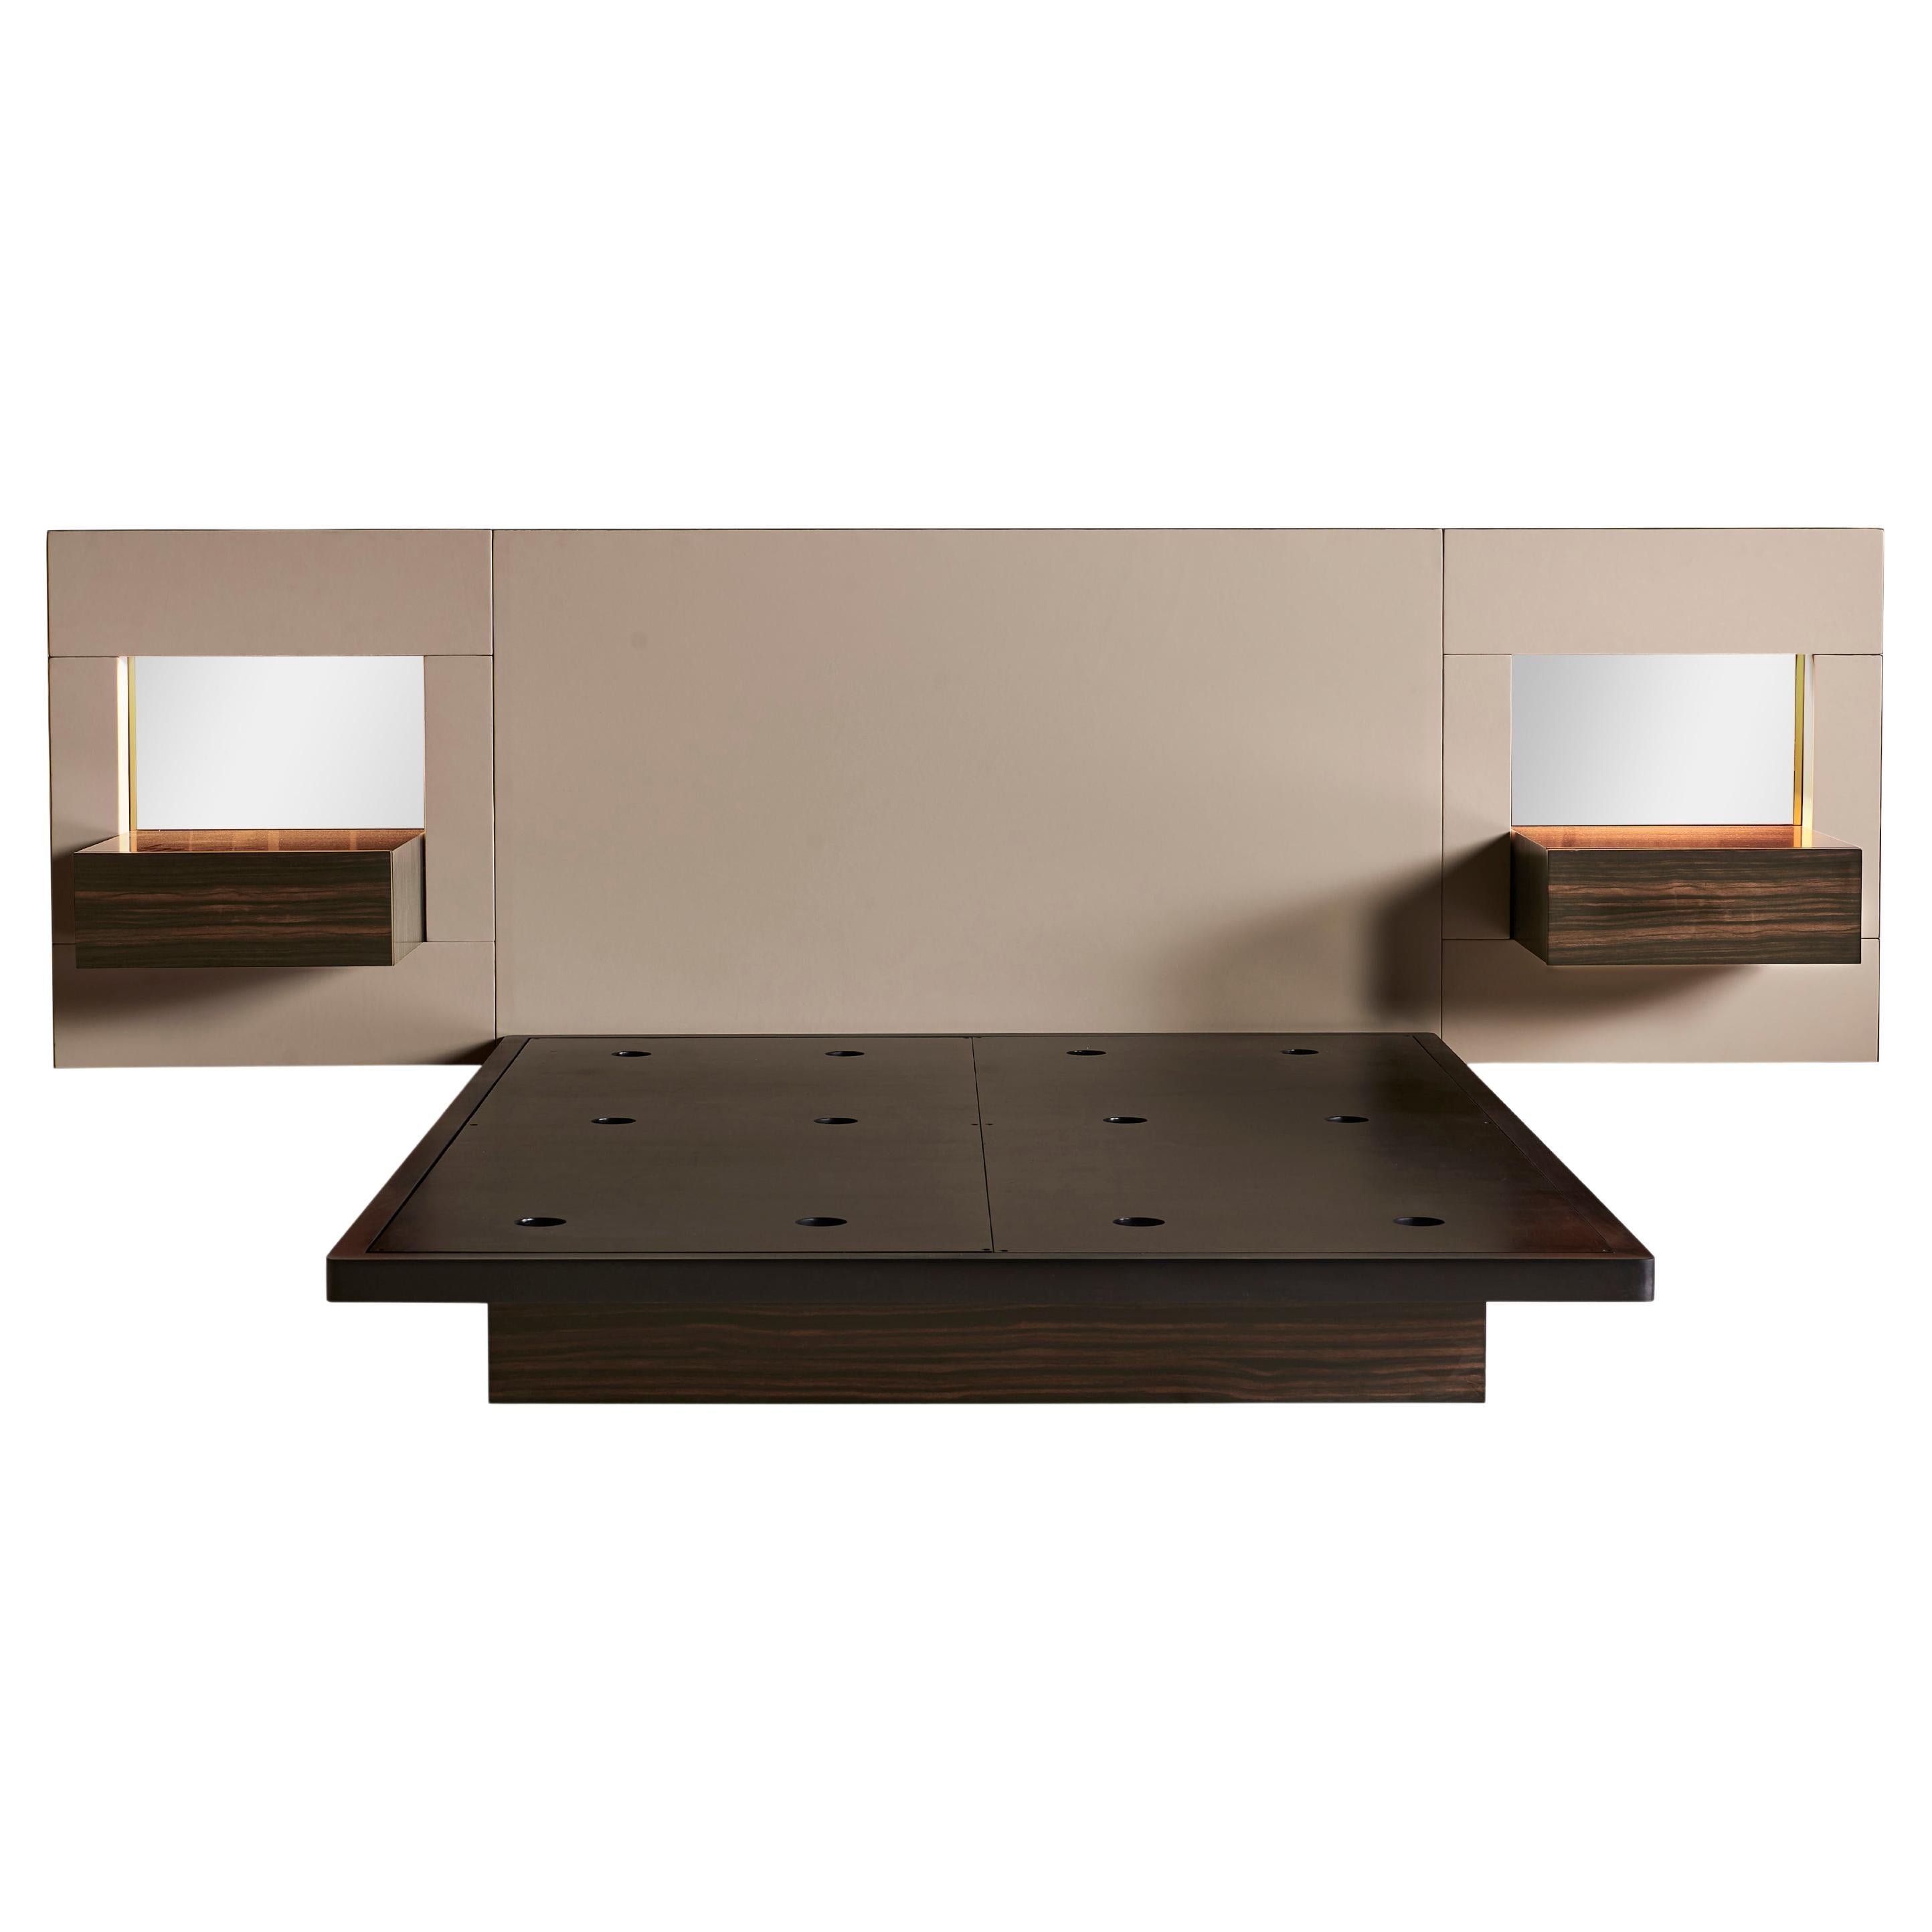 Sleek and contemporary, the Essex Bed is constructed of a wooden frame with a leather headboard wrapped in metal banding. Convenient wooden nightstands with concealed drawers are recessed within a mirrored cavity on each side of the headboard which